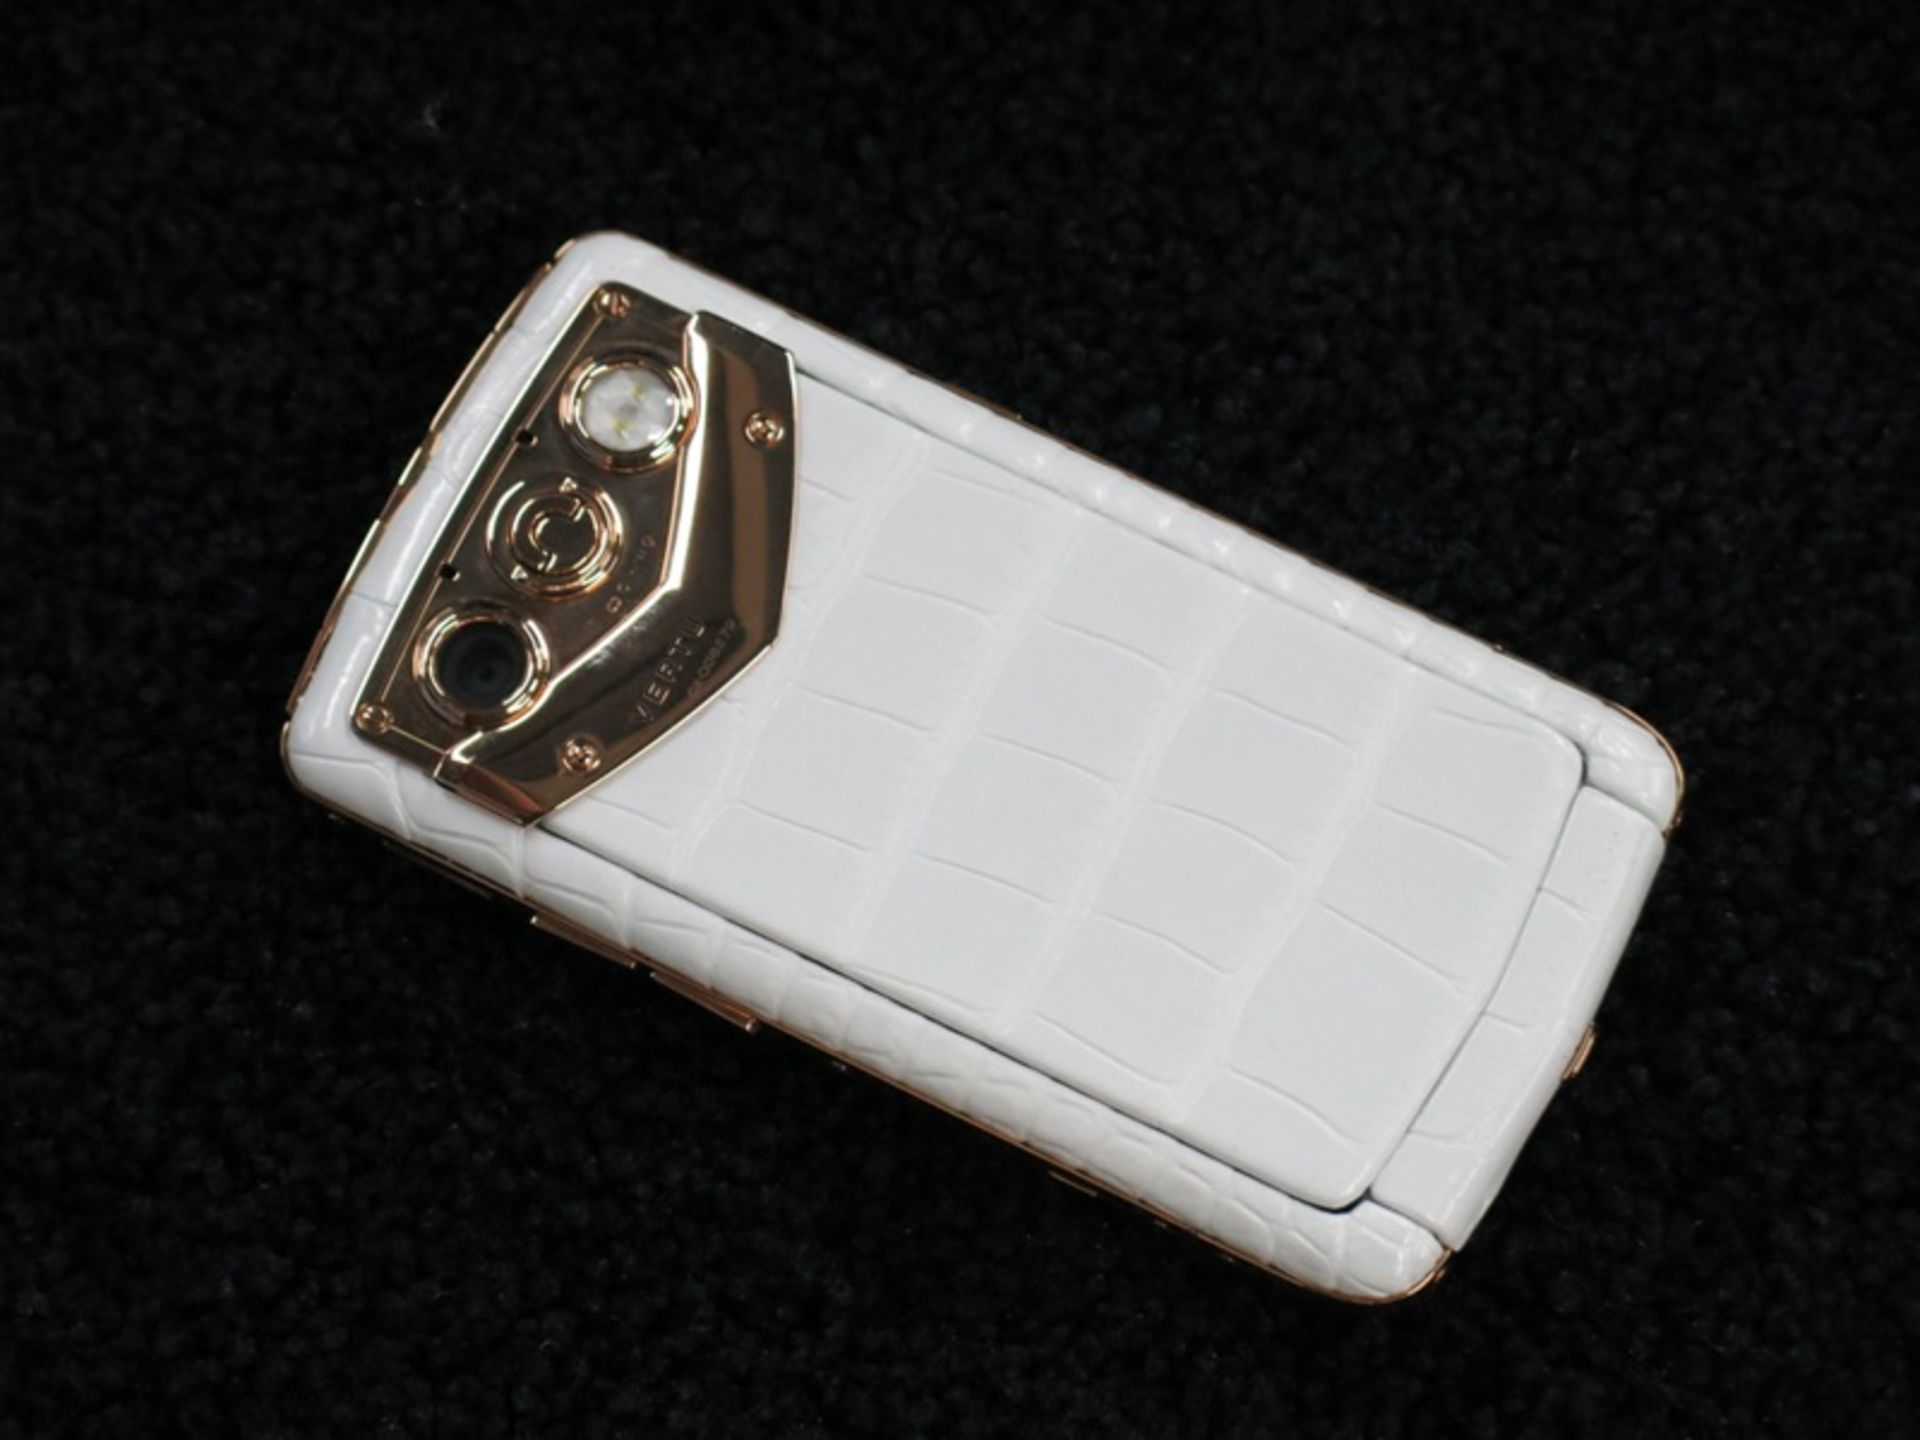 Vertu Constellation Quest Phone in 18kt Red Gold with Diamond Pillow Trim & Diamond Select Key. - Image 7 of 7